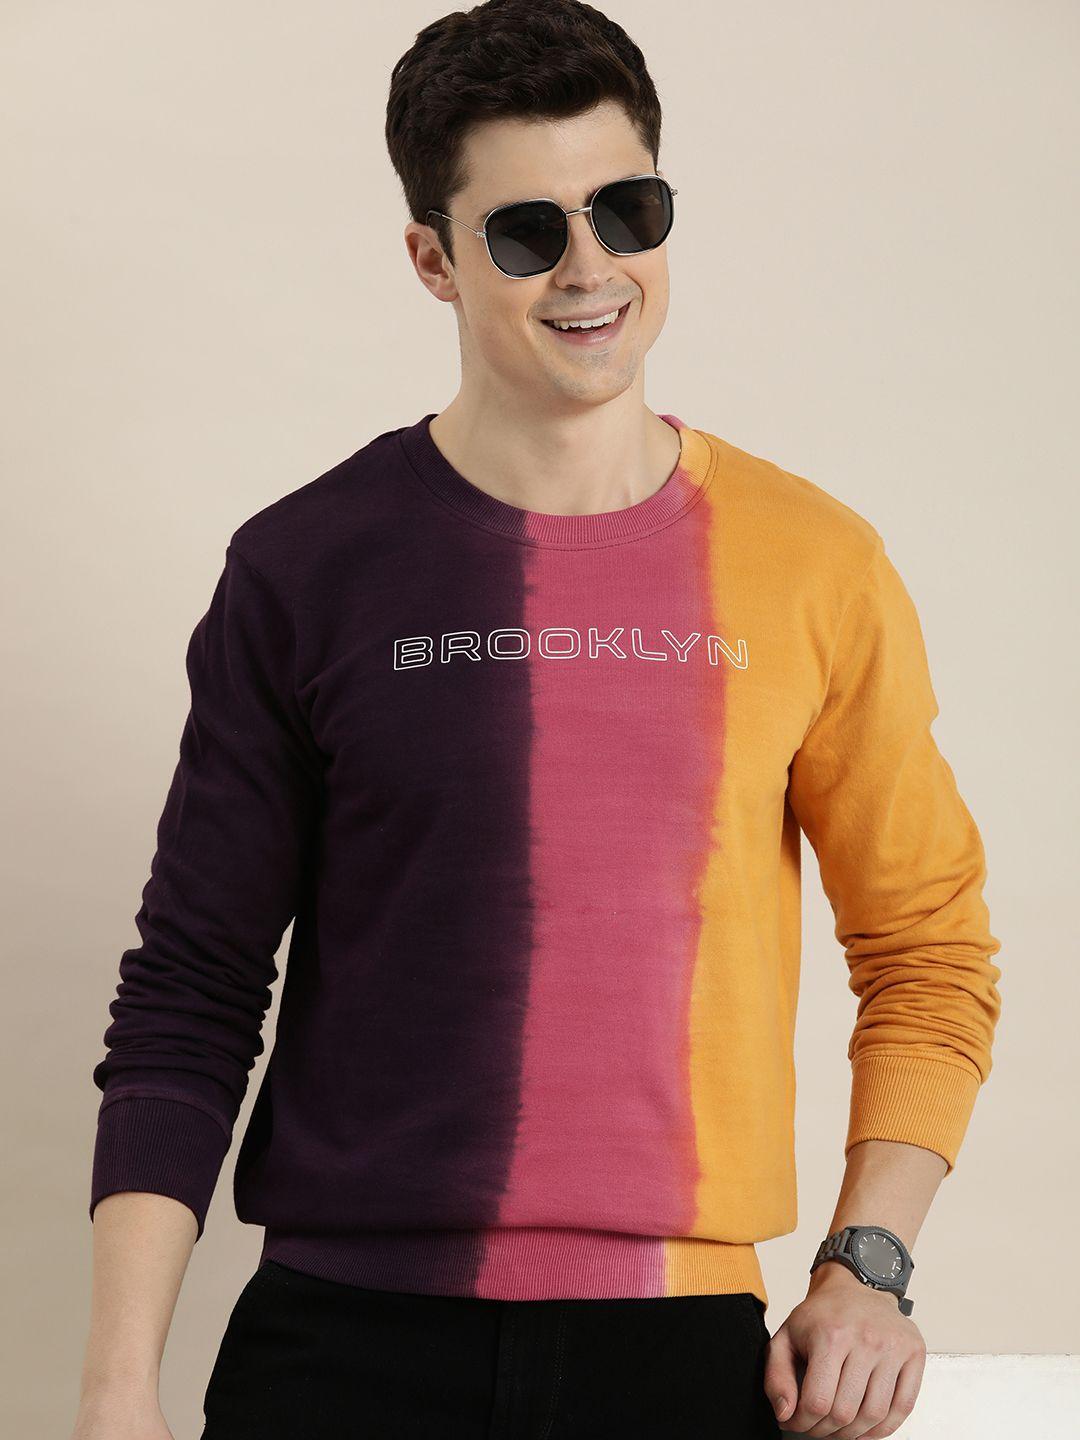 here&now colourblocked and printed pure cotton sweatshirt